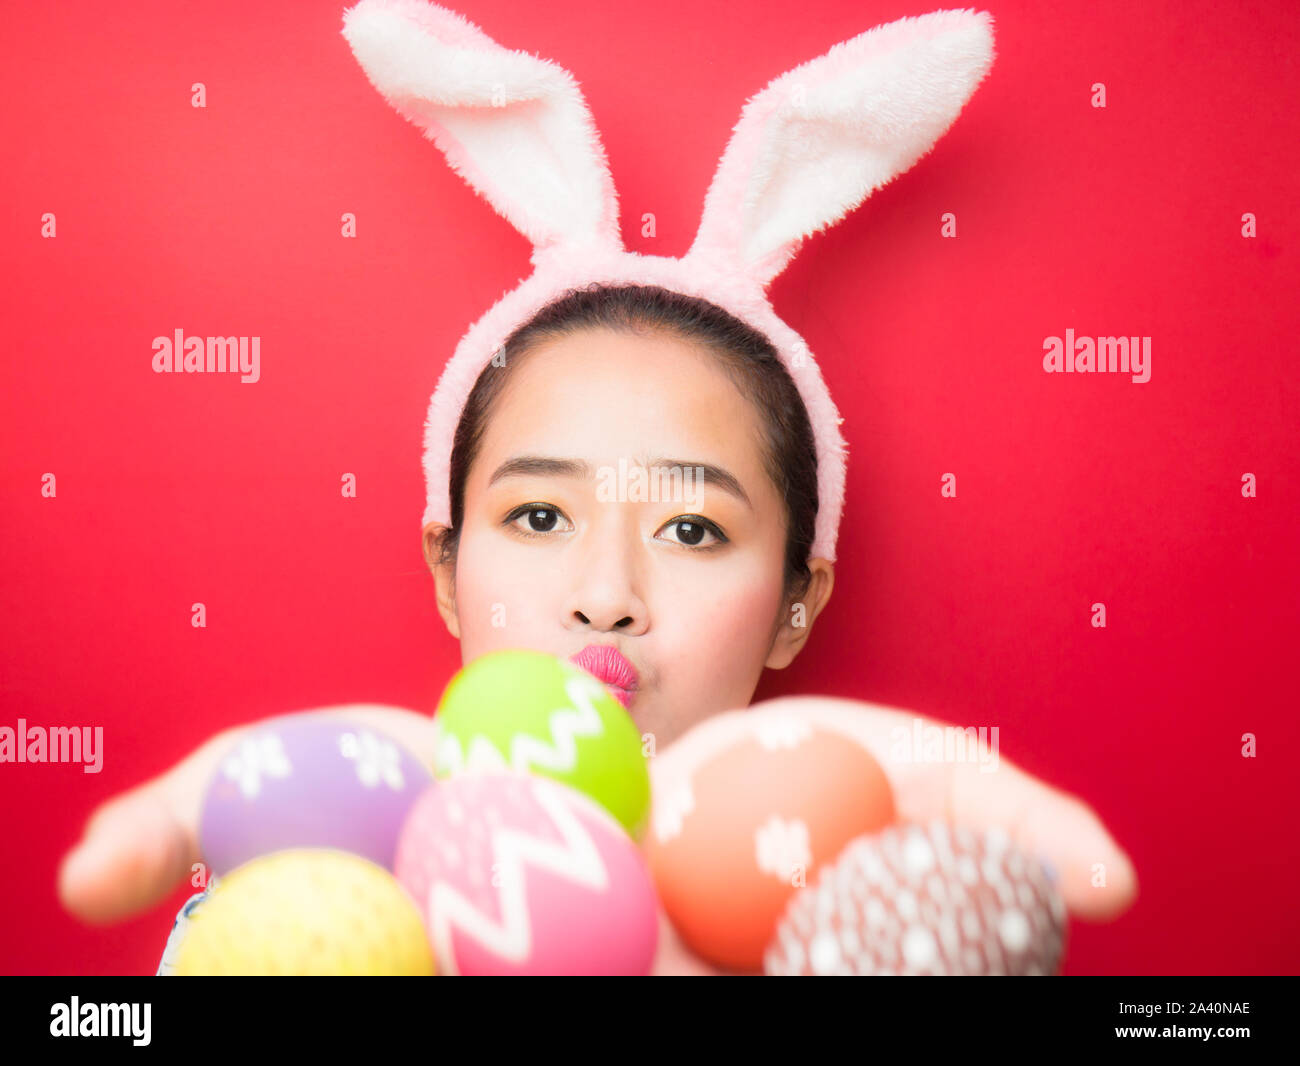 Woman wearing bunny ears headband and carrying Easter eggs during the Easter season. Attractive young woman and smiling on a bright red background. Stock Photo